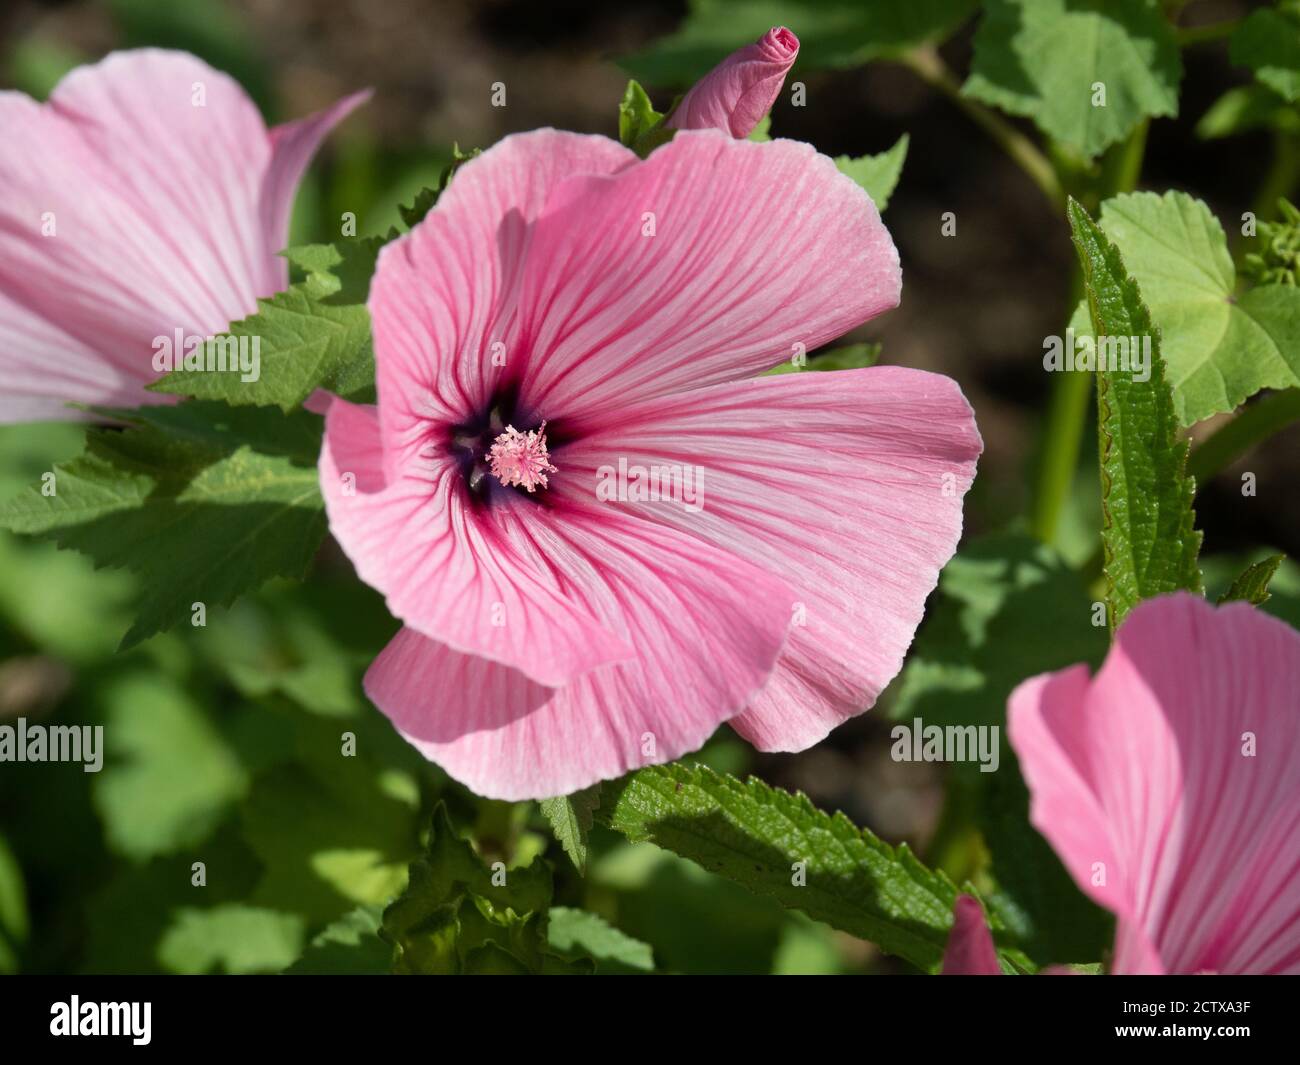 A close up of a single shell pink flower of the annual mallow Lavatera Silver Cup Stock Photo